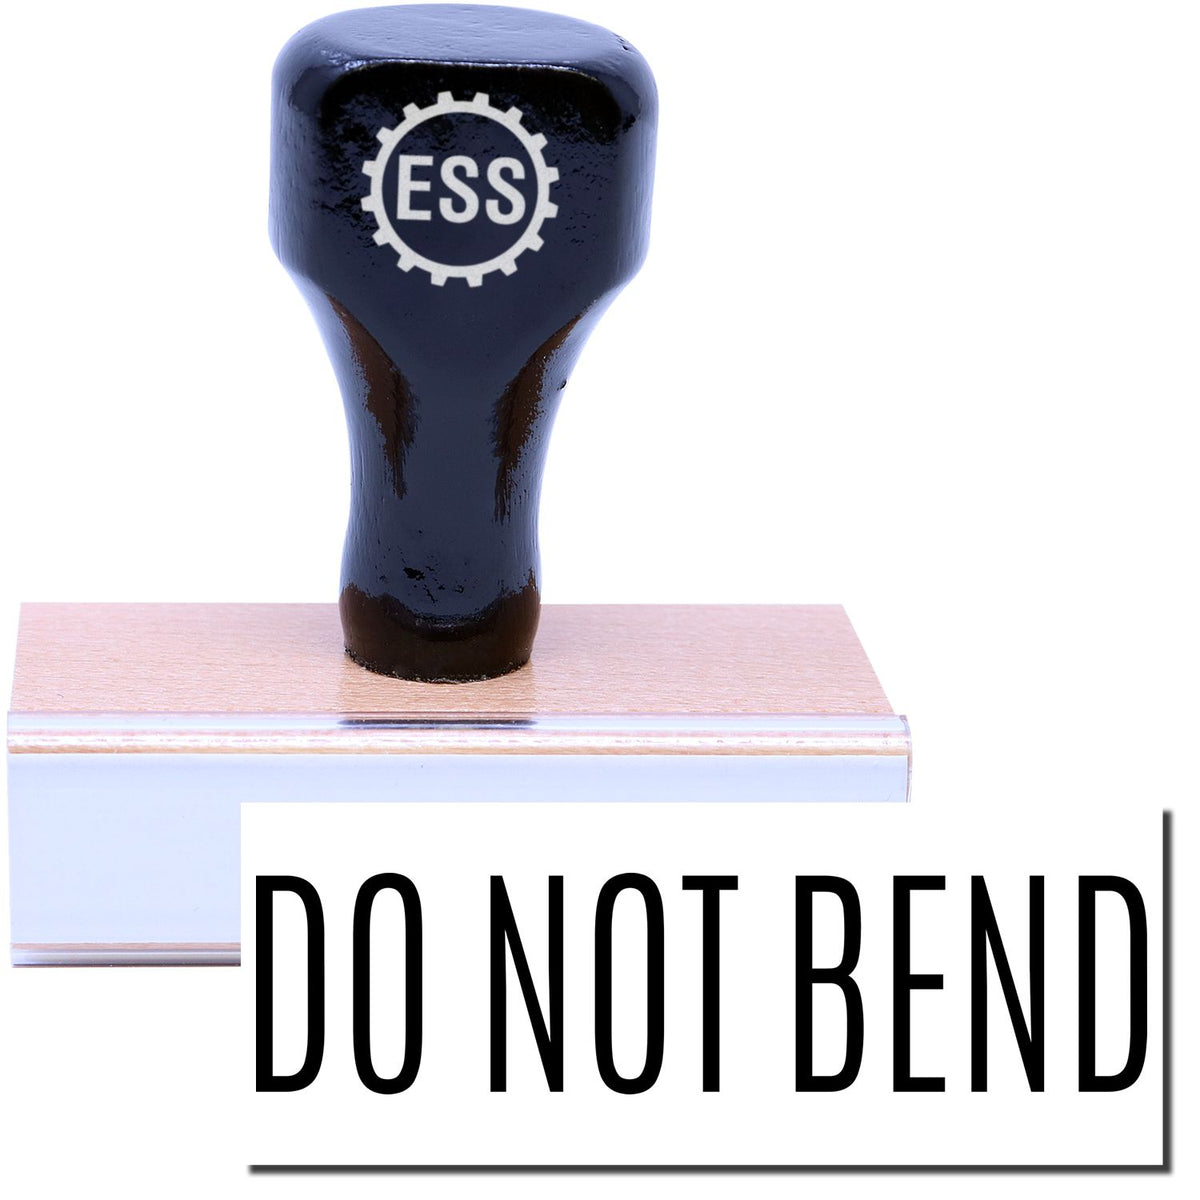 A stock office rubber stamp with a stamped image showing how the text &quot;DO NOT BEND&quot; in a large font is displayed after stamping.